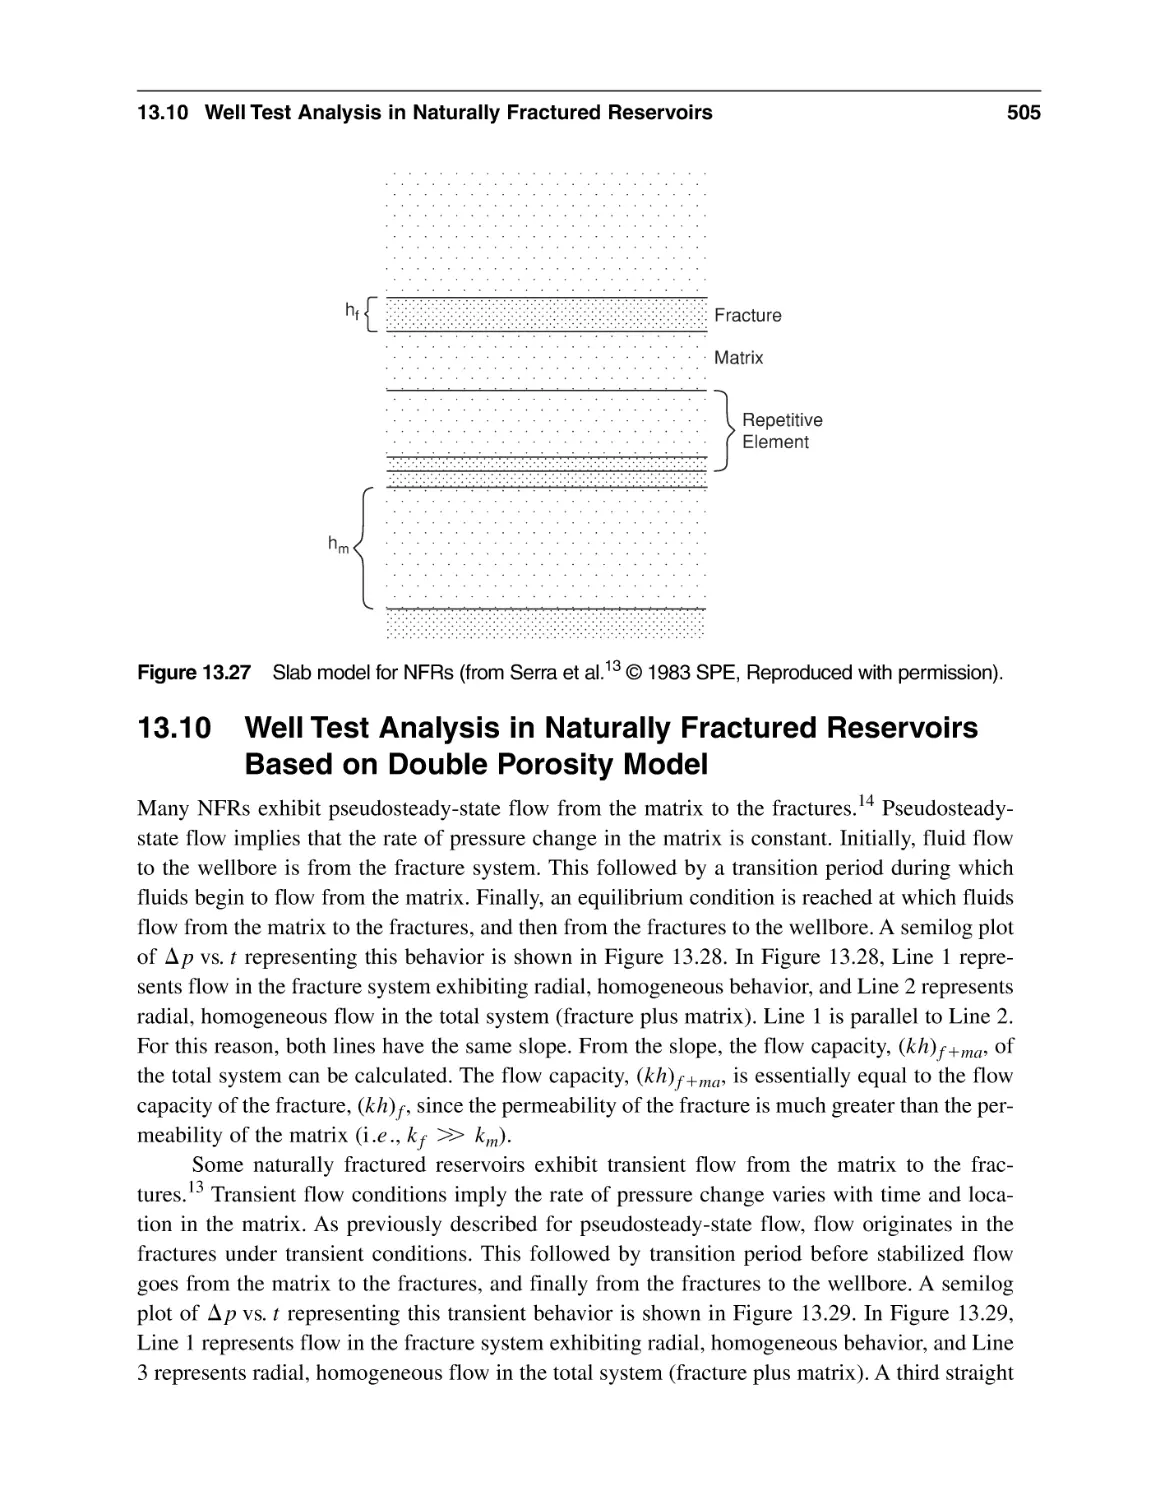 13.10 Well Test Analysis in Naturally Fractured Reservoirs Based on Double Porosity Model